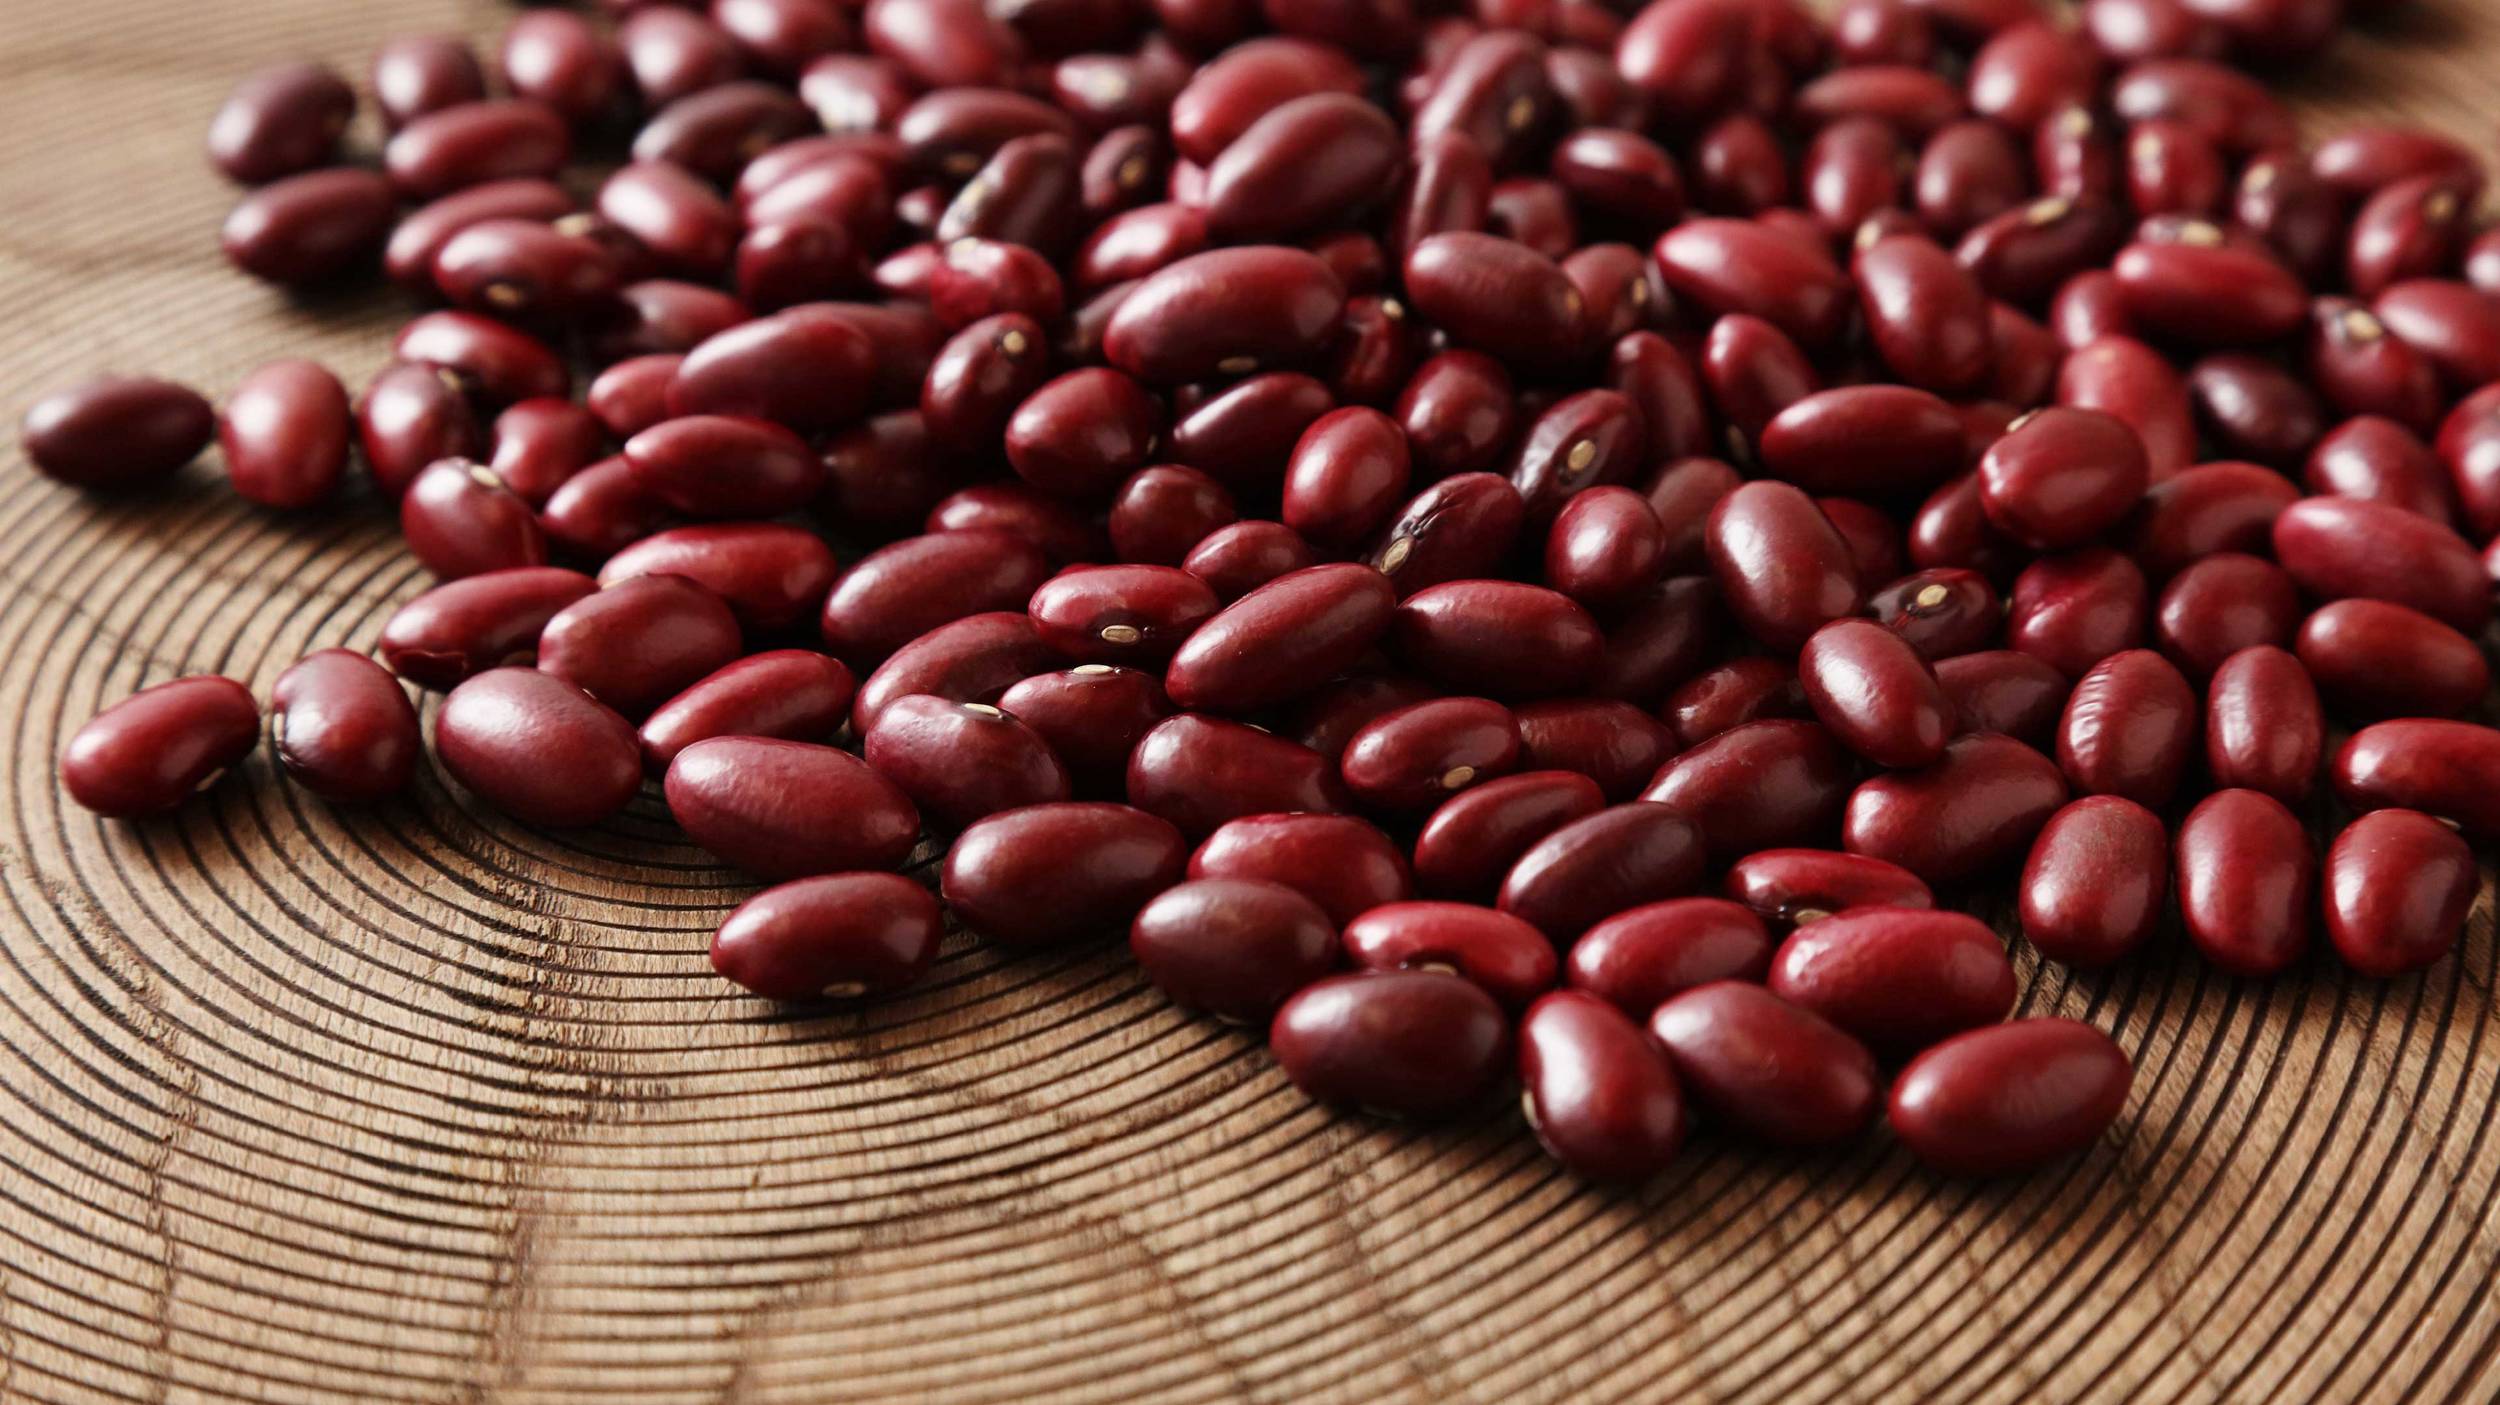 Dark red kidney beans are dark-reddish brown beans with a kidney-shaped form, the feature to which the bean owes its name.